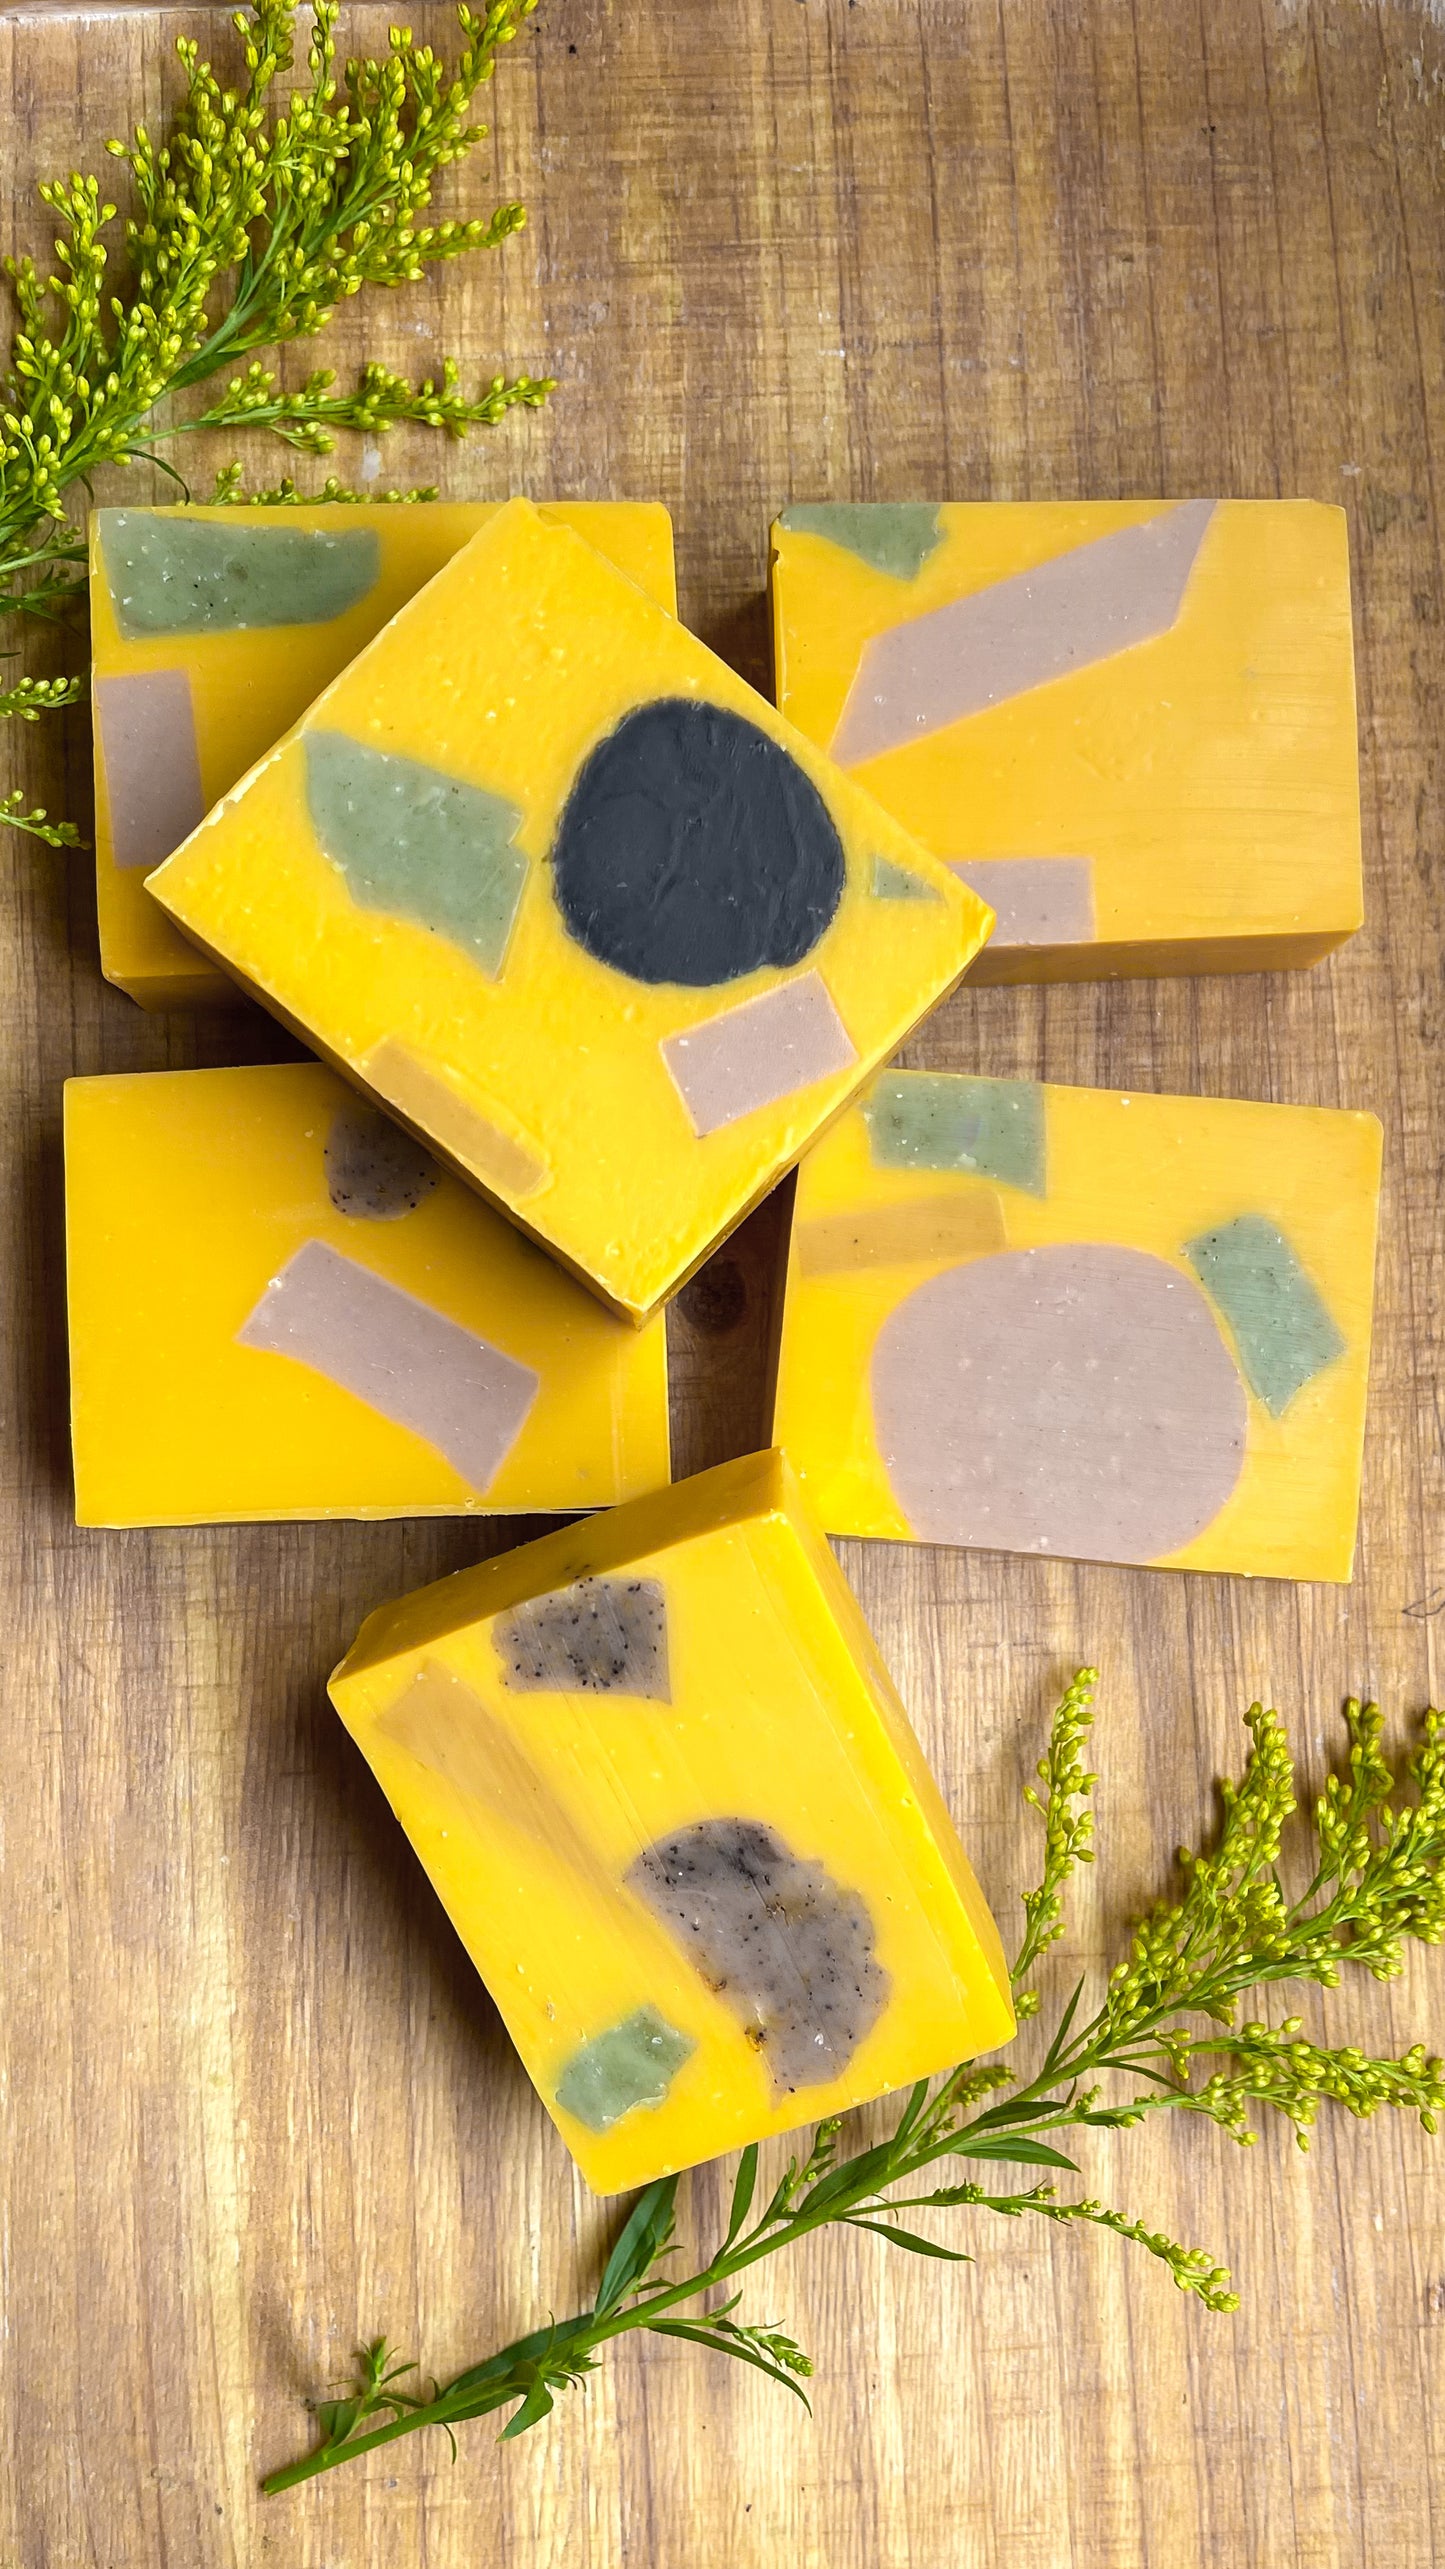 PICASSOAP | upcycled soap bar